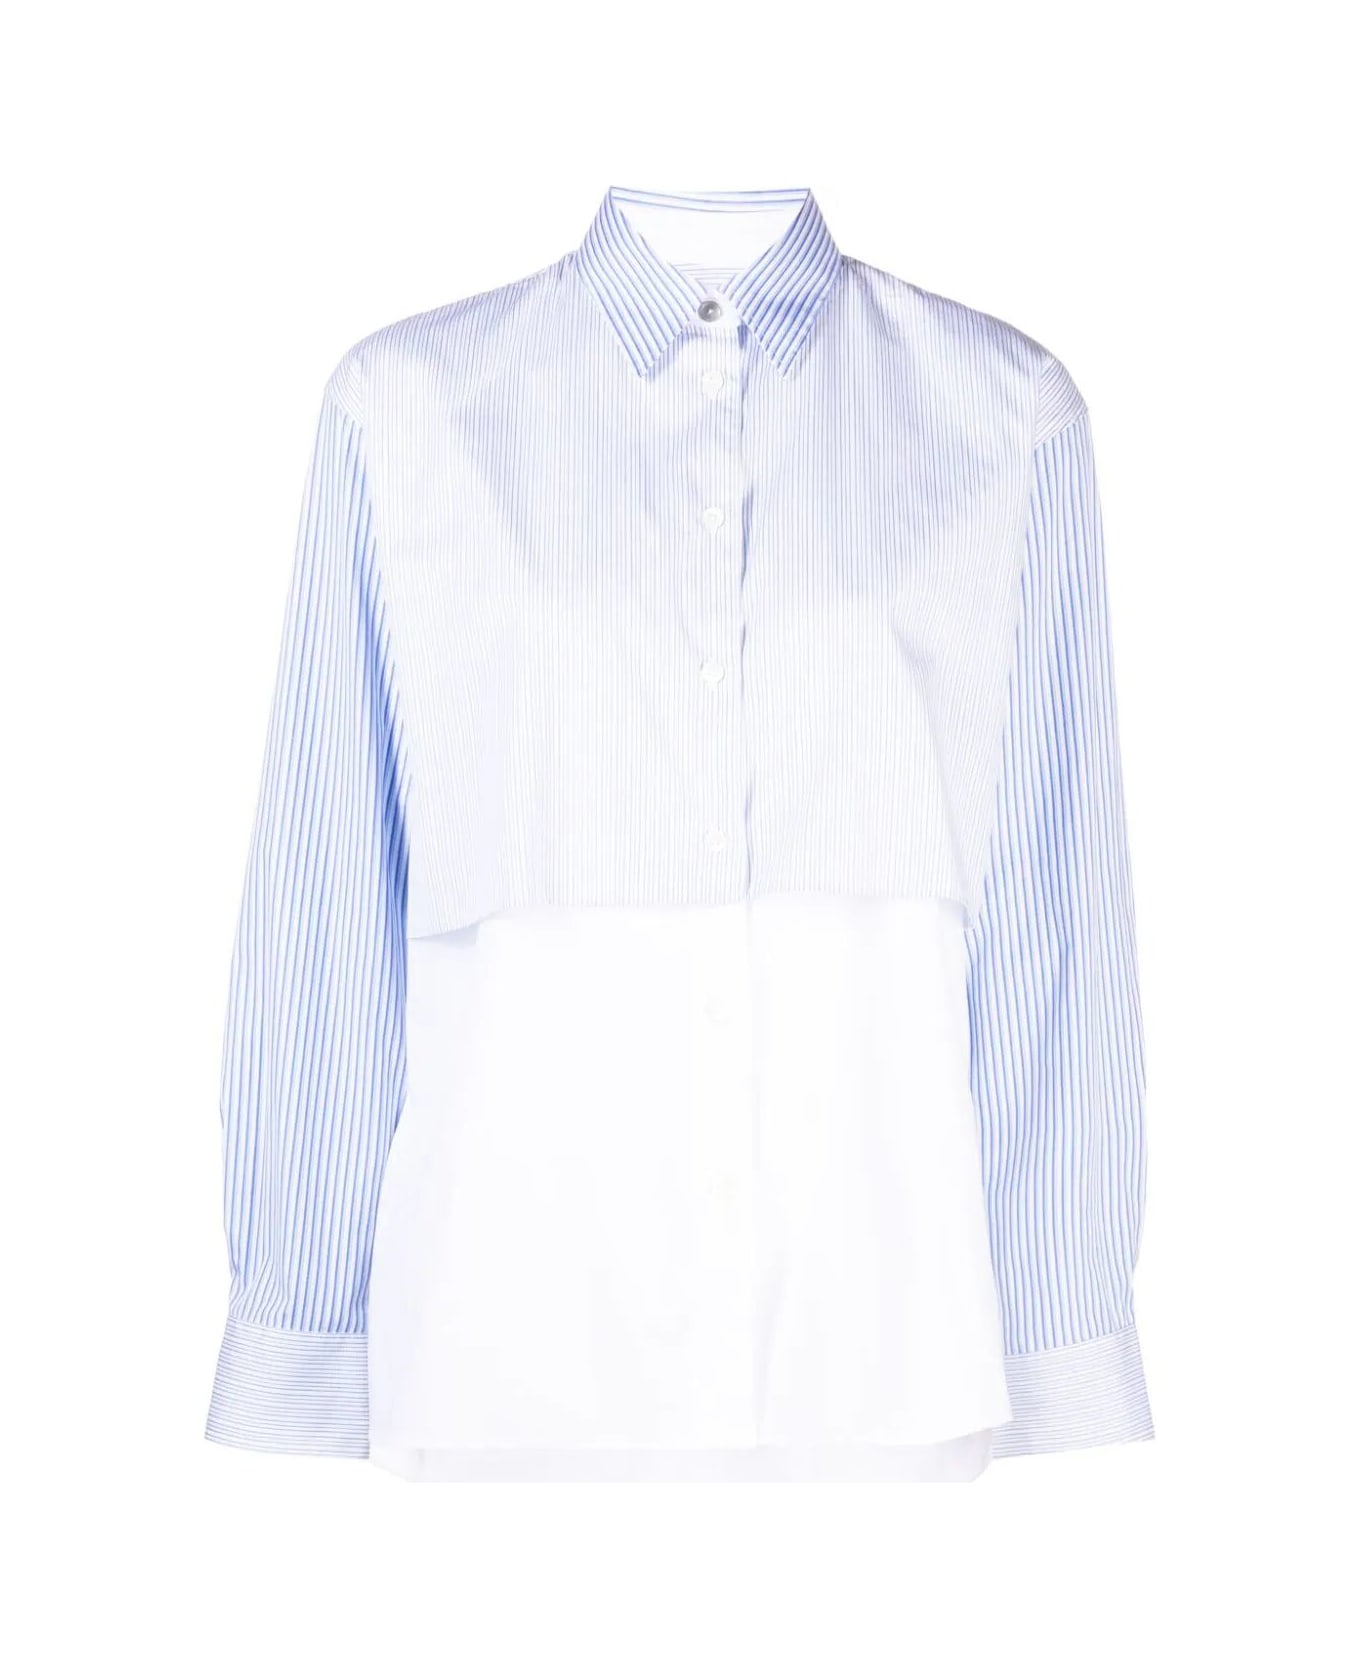 PS by Paul Smith Classic Shirt - White